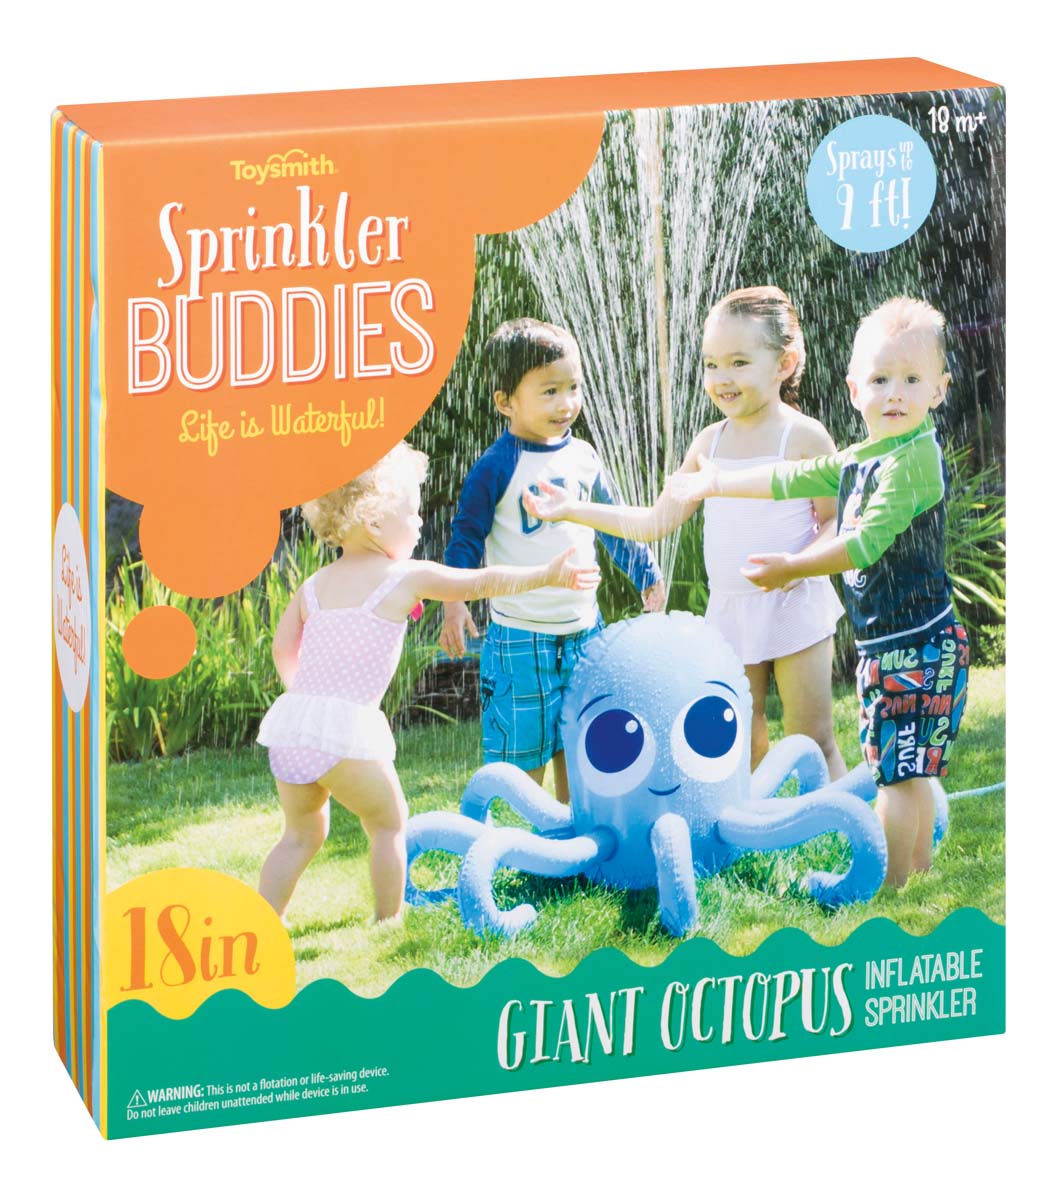 Package of Sprinkler Buddies Giant Octopus showing children playing